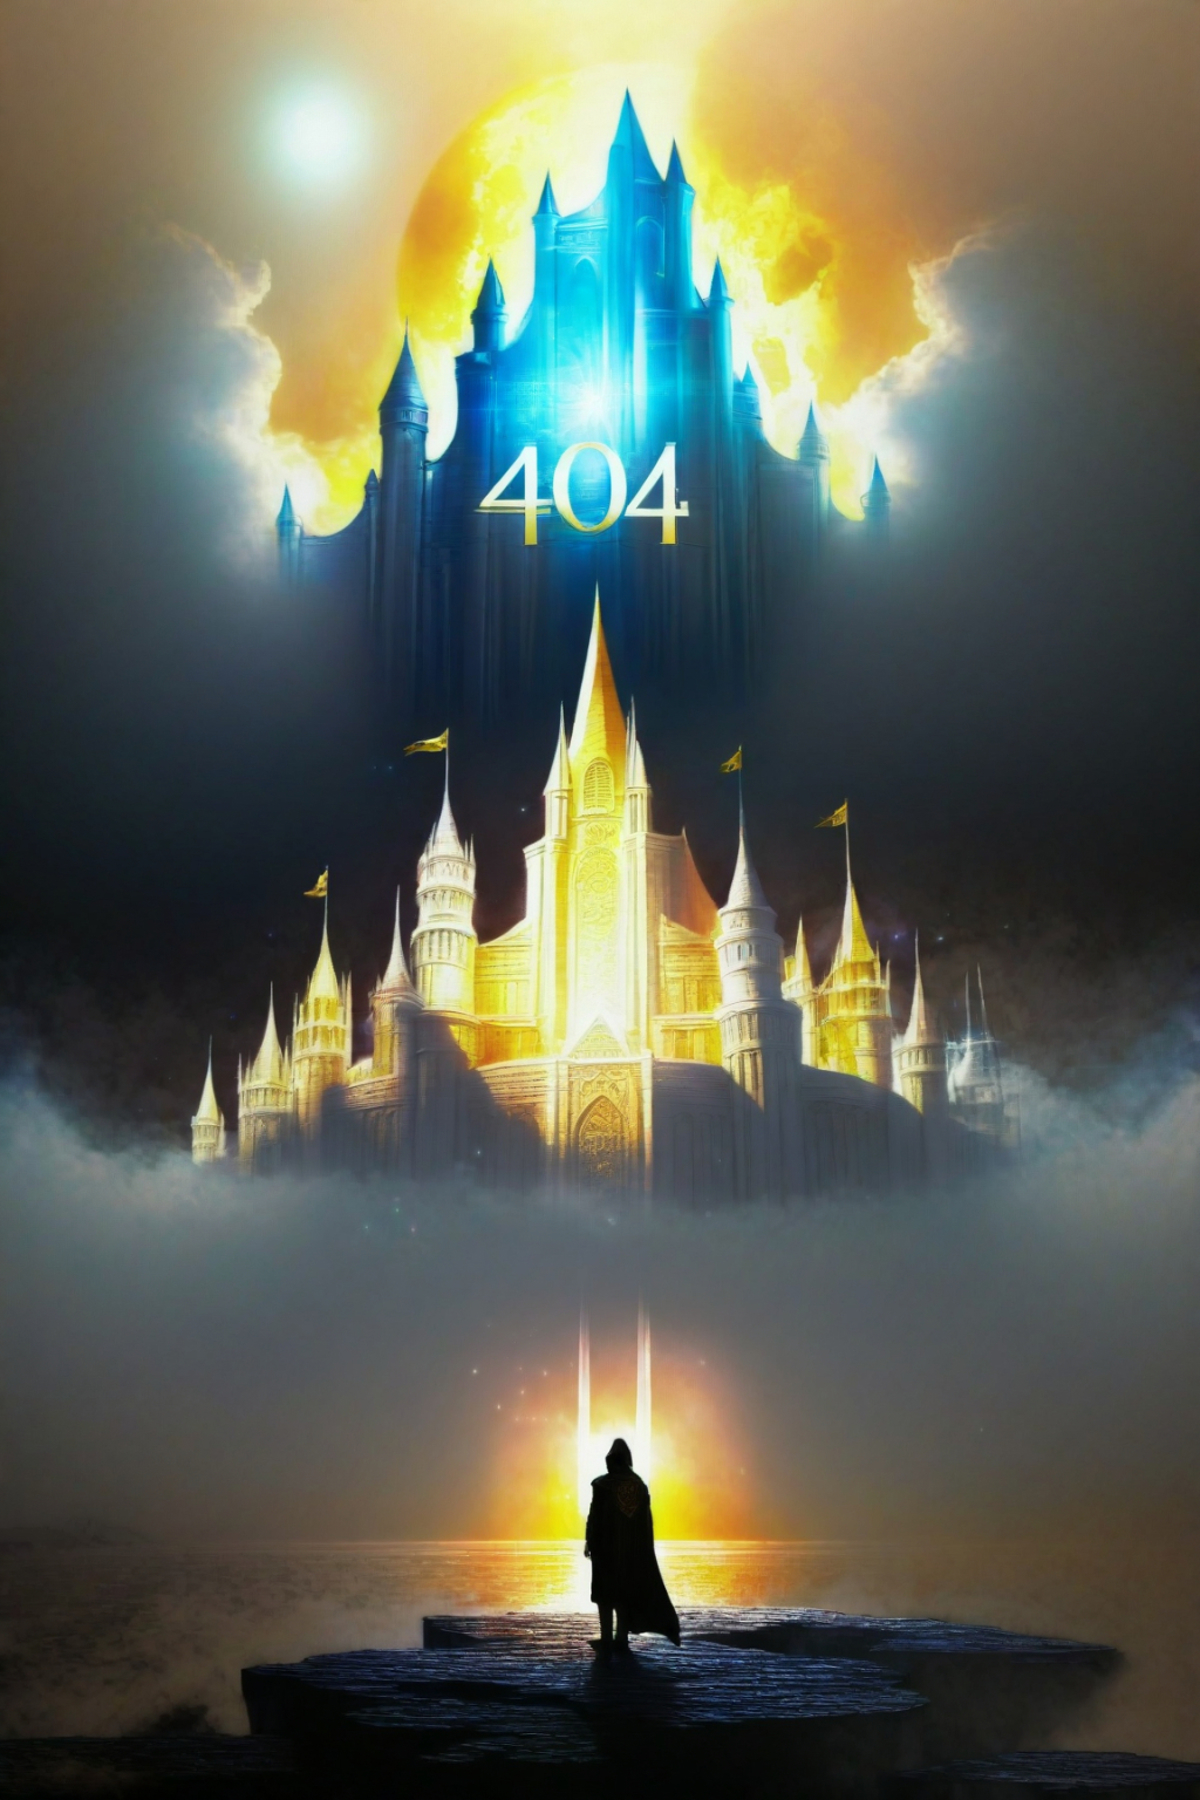 A fantasy illustration of a castle with the number 404 in the sky.